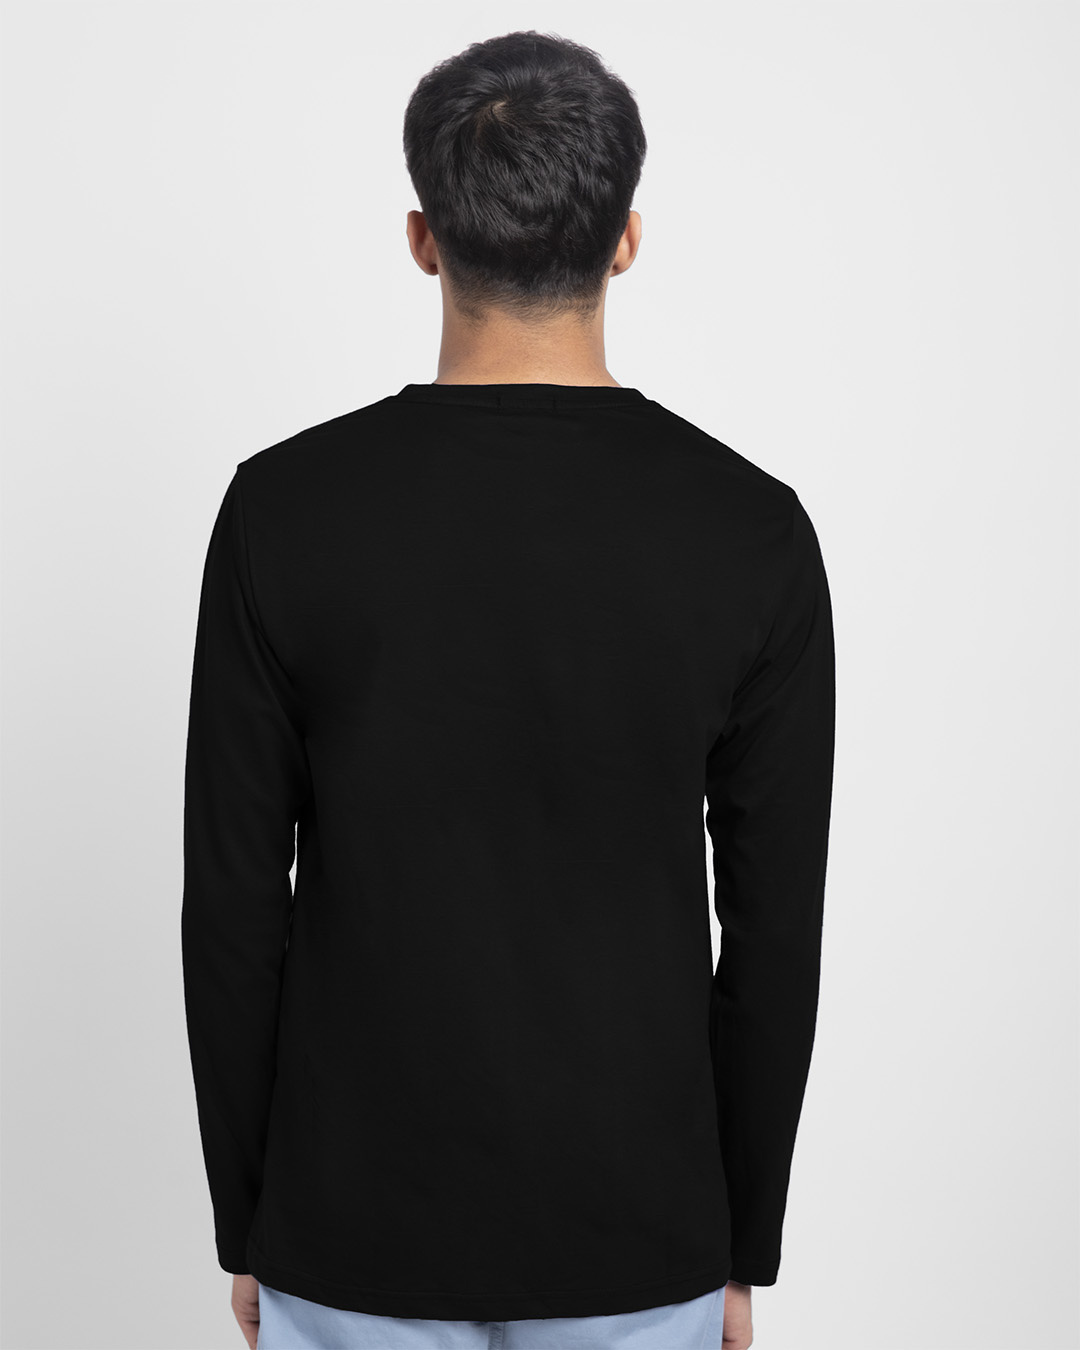 Shop Escape to outdoors Full Sleeve T-Shirt Black-Back